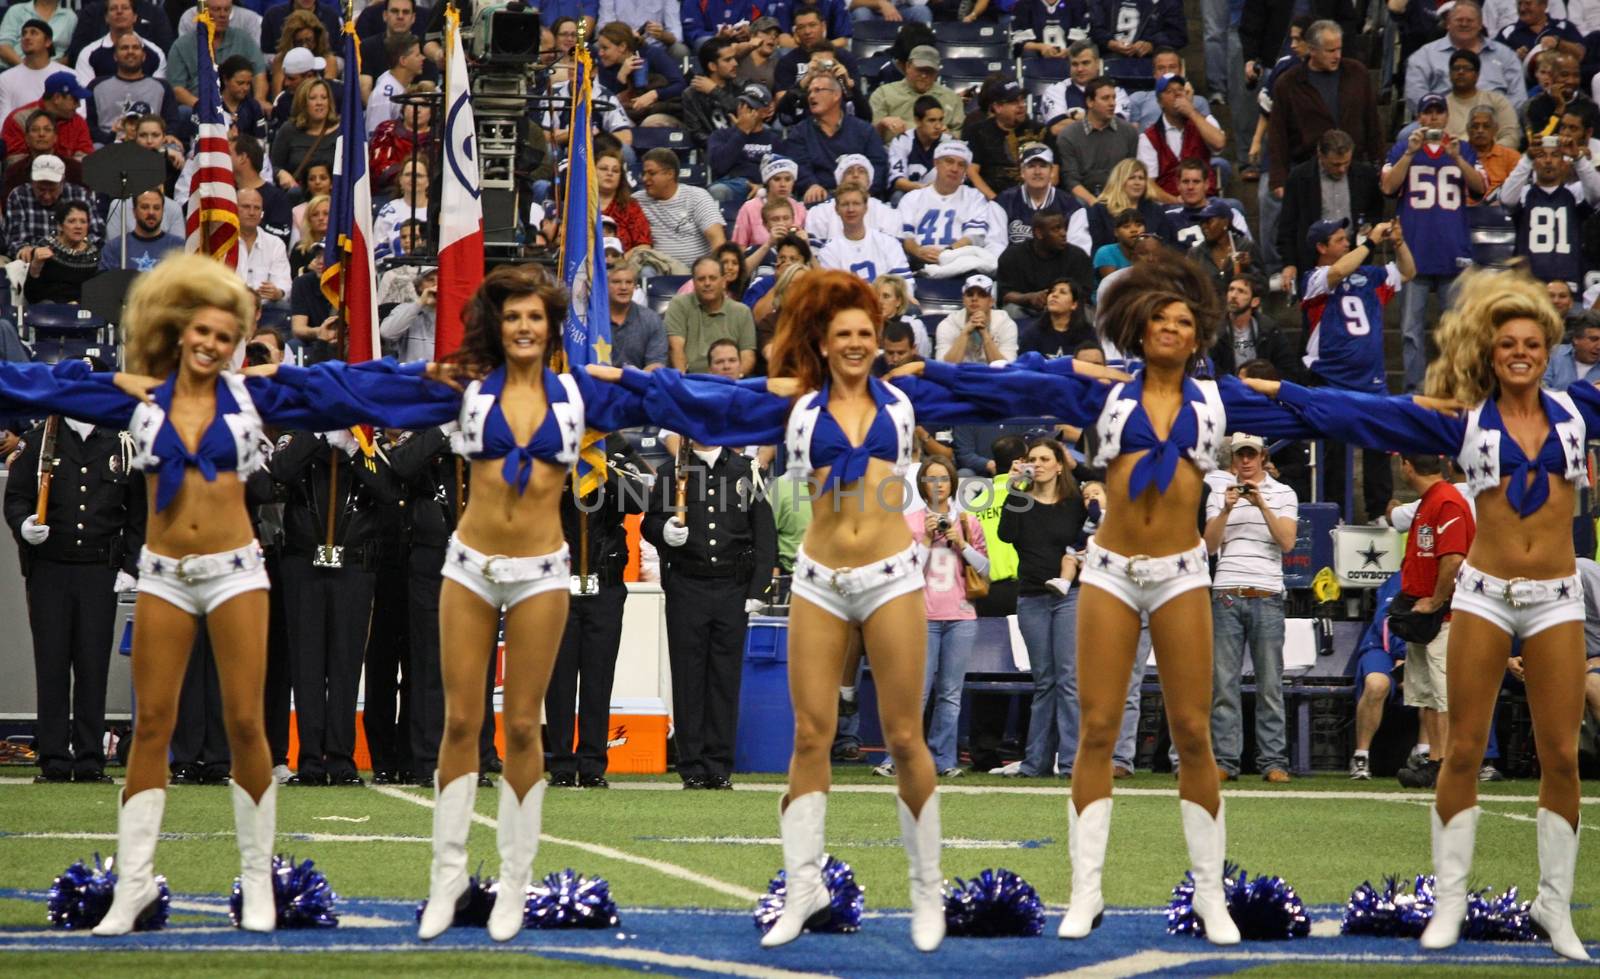 DALLAS - DEC 14: Taken in Texas Stadium on Sunday, December 14, 2008. Dallas Cowboys cheerleaders during a pregame show. Cowboys played the NY Giants.
